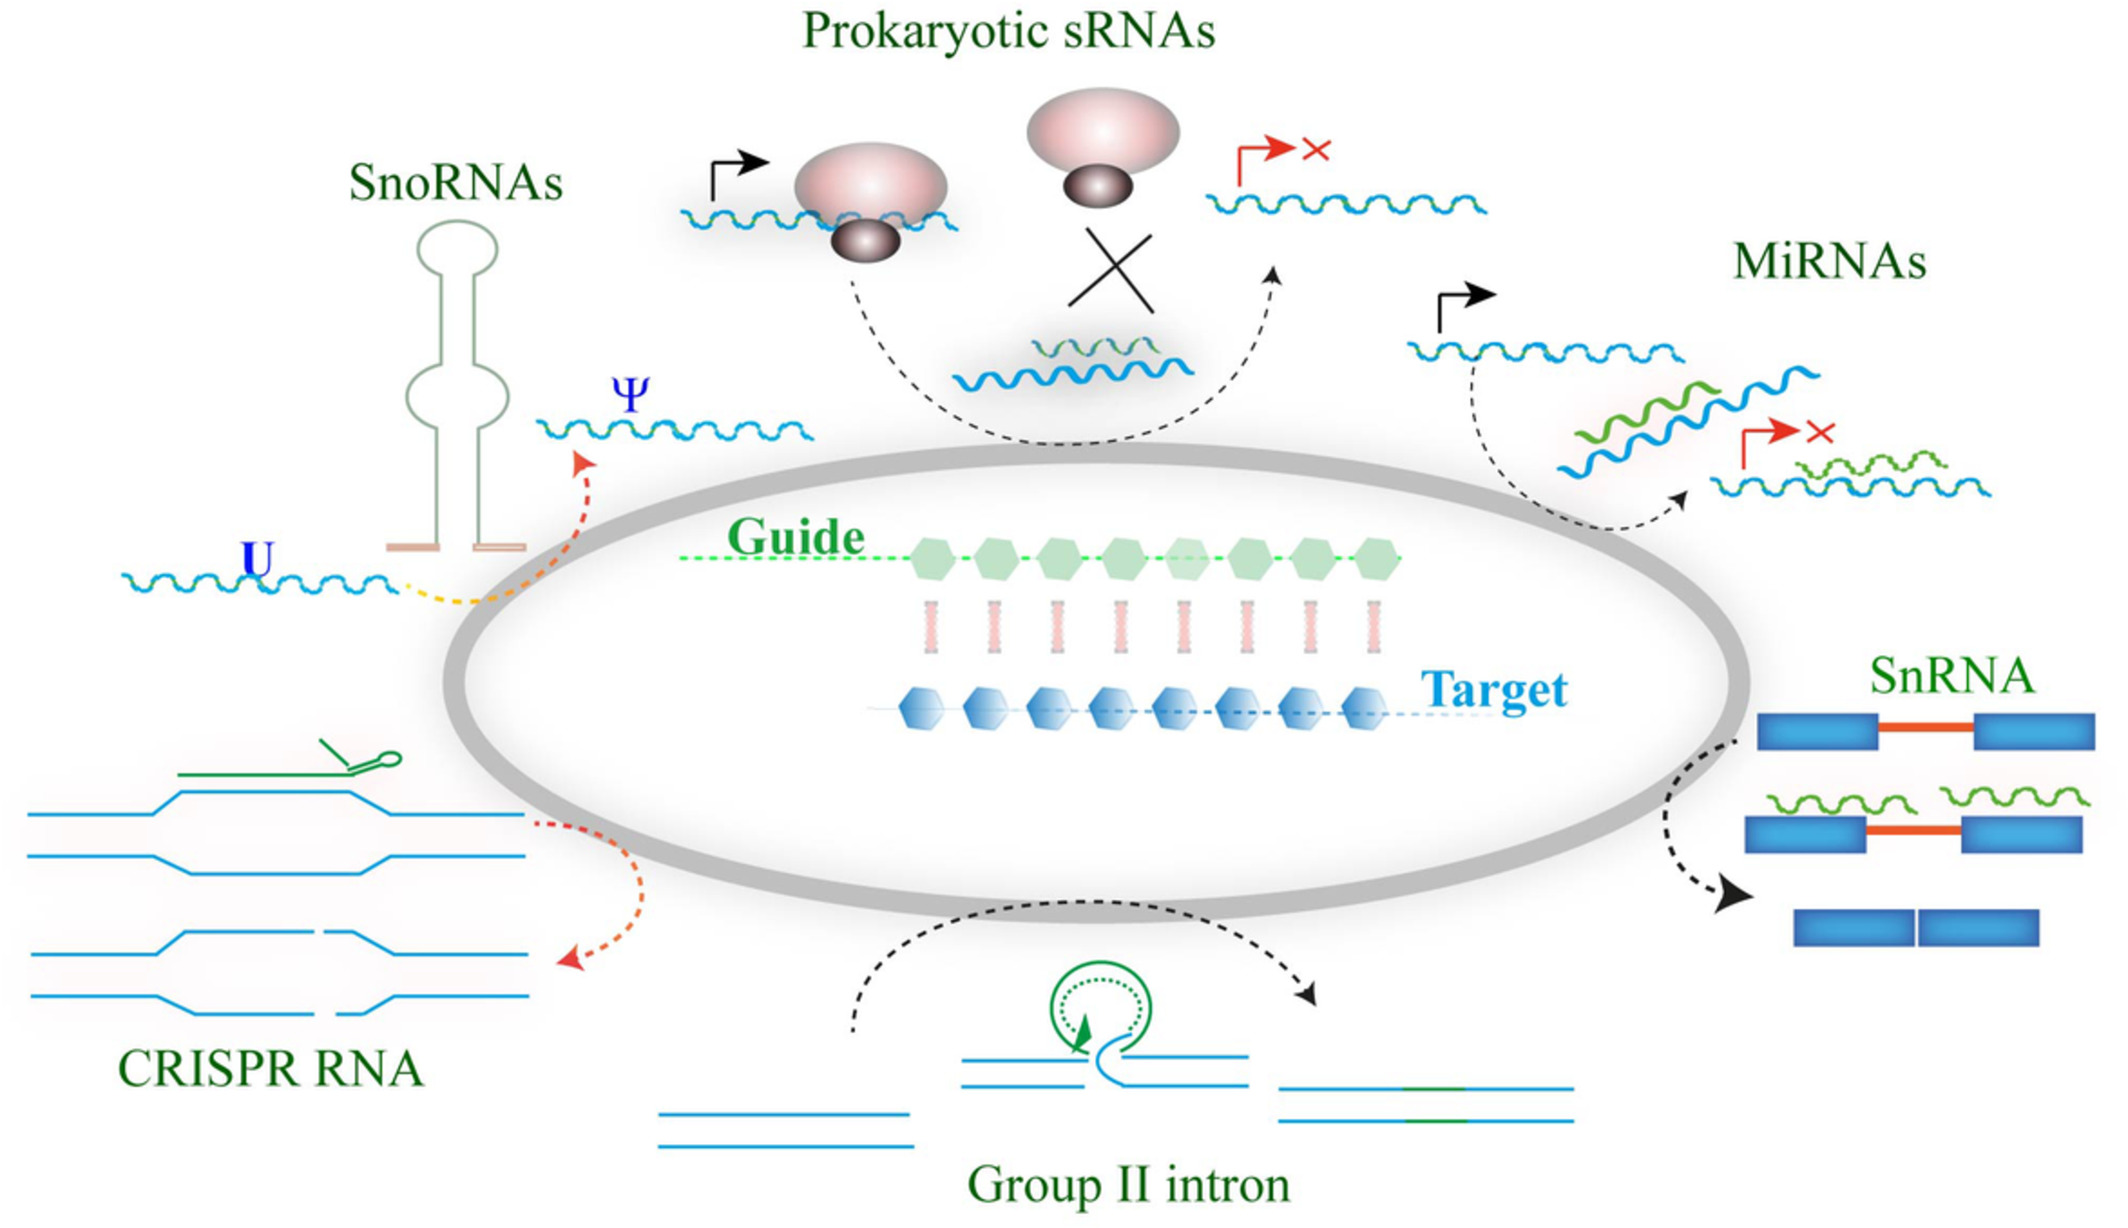 The “guiding” principles of noncoding RNA function